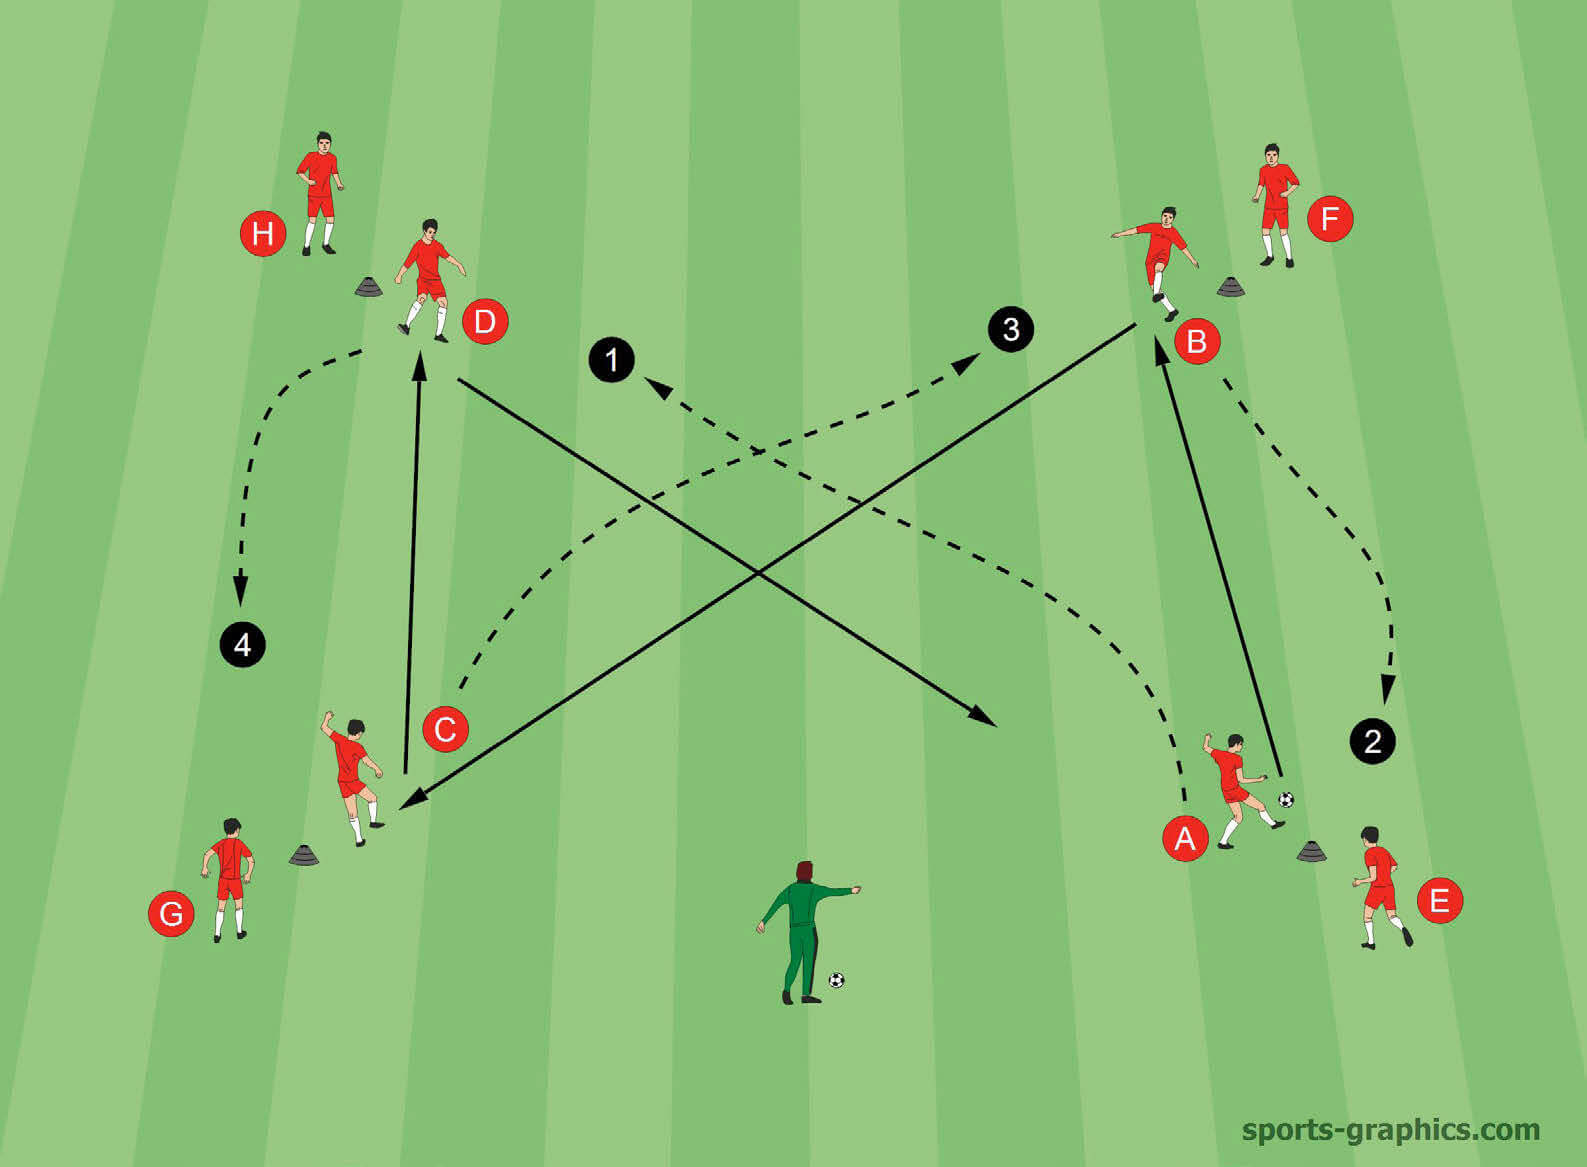 Passing sequence (looking for position)